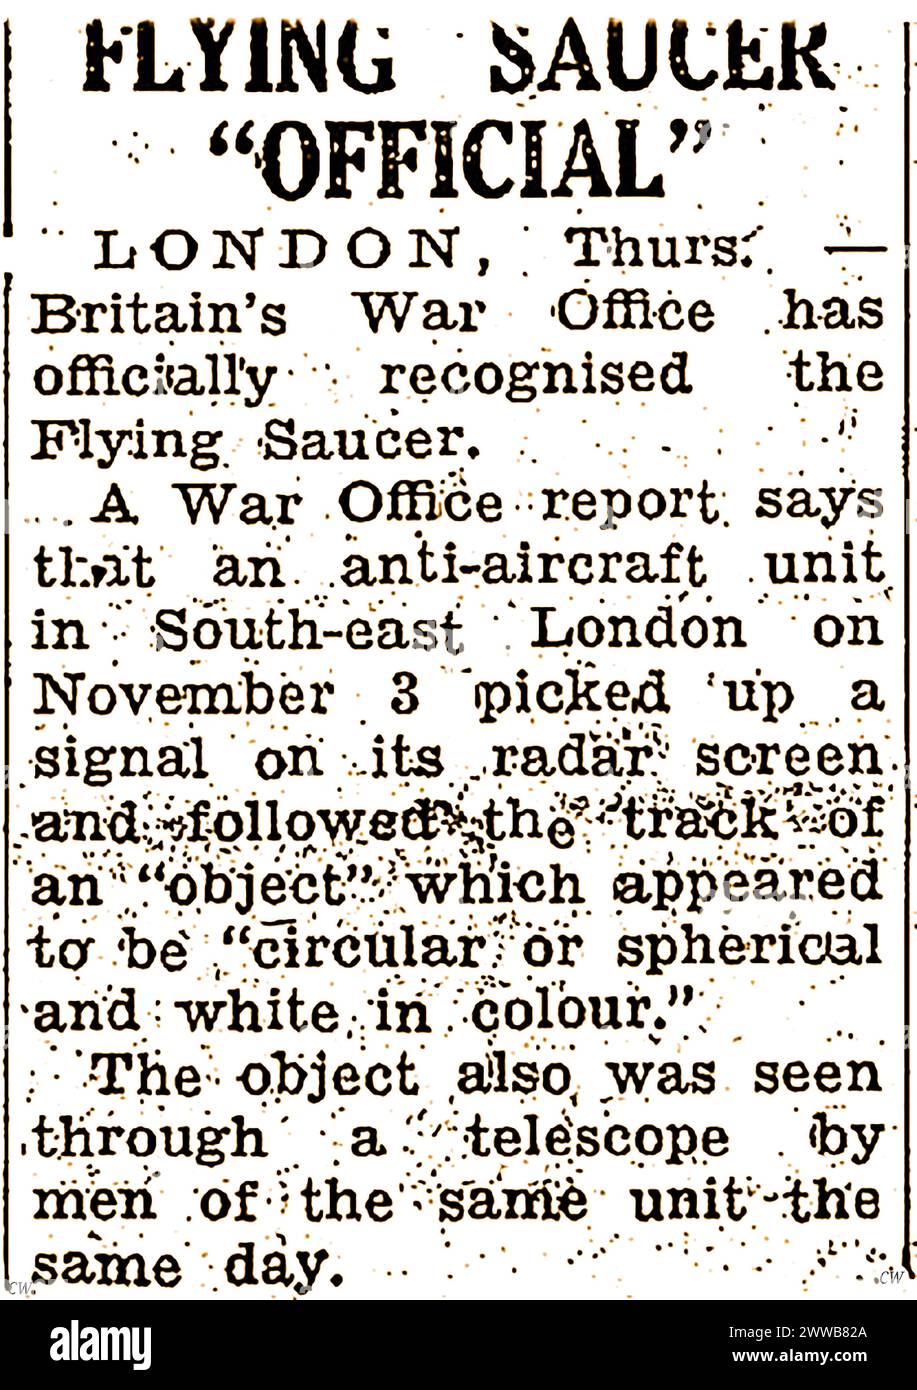 Illawarra Daily Mercury, Wollongong, Australia Nov 20 1953 report of official London War Office tracking a white  UIFO Stock Photo